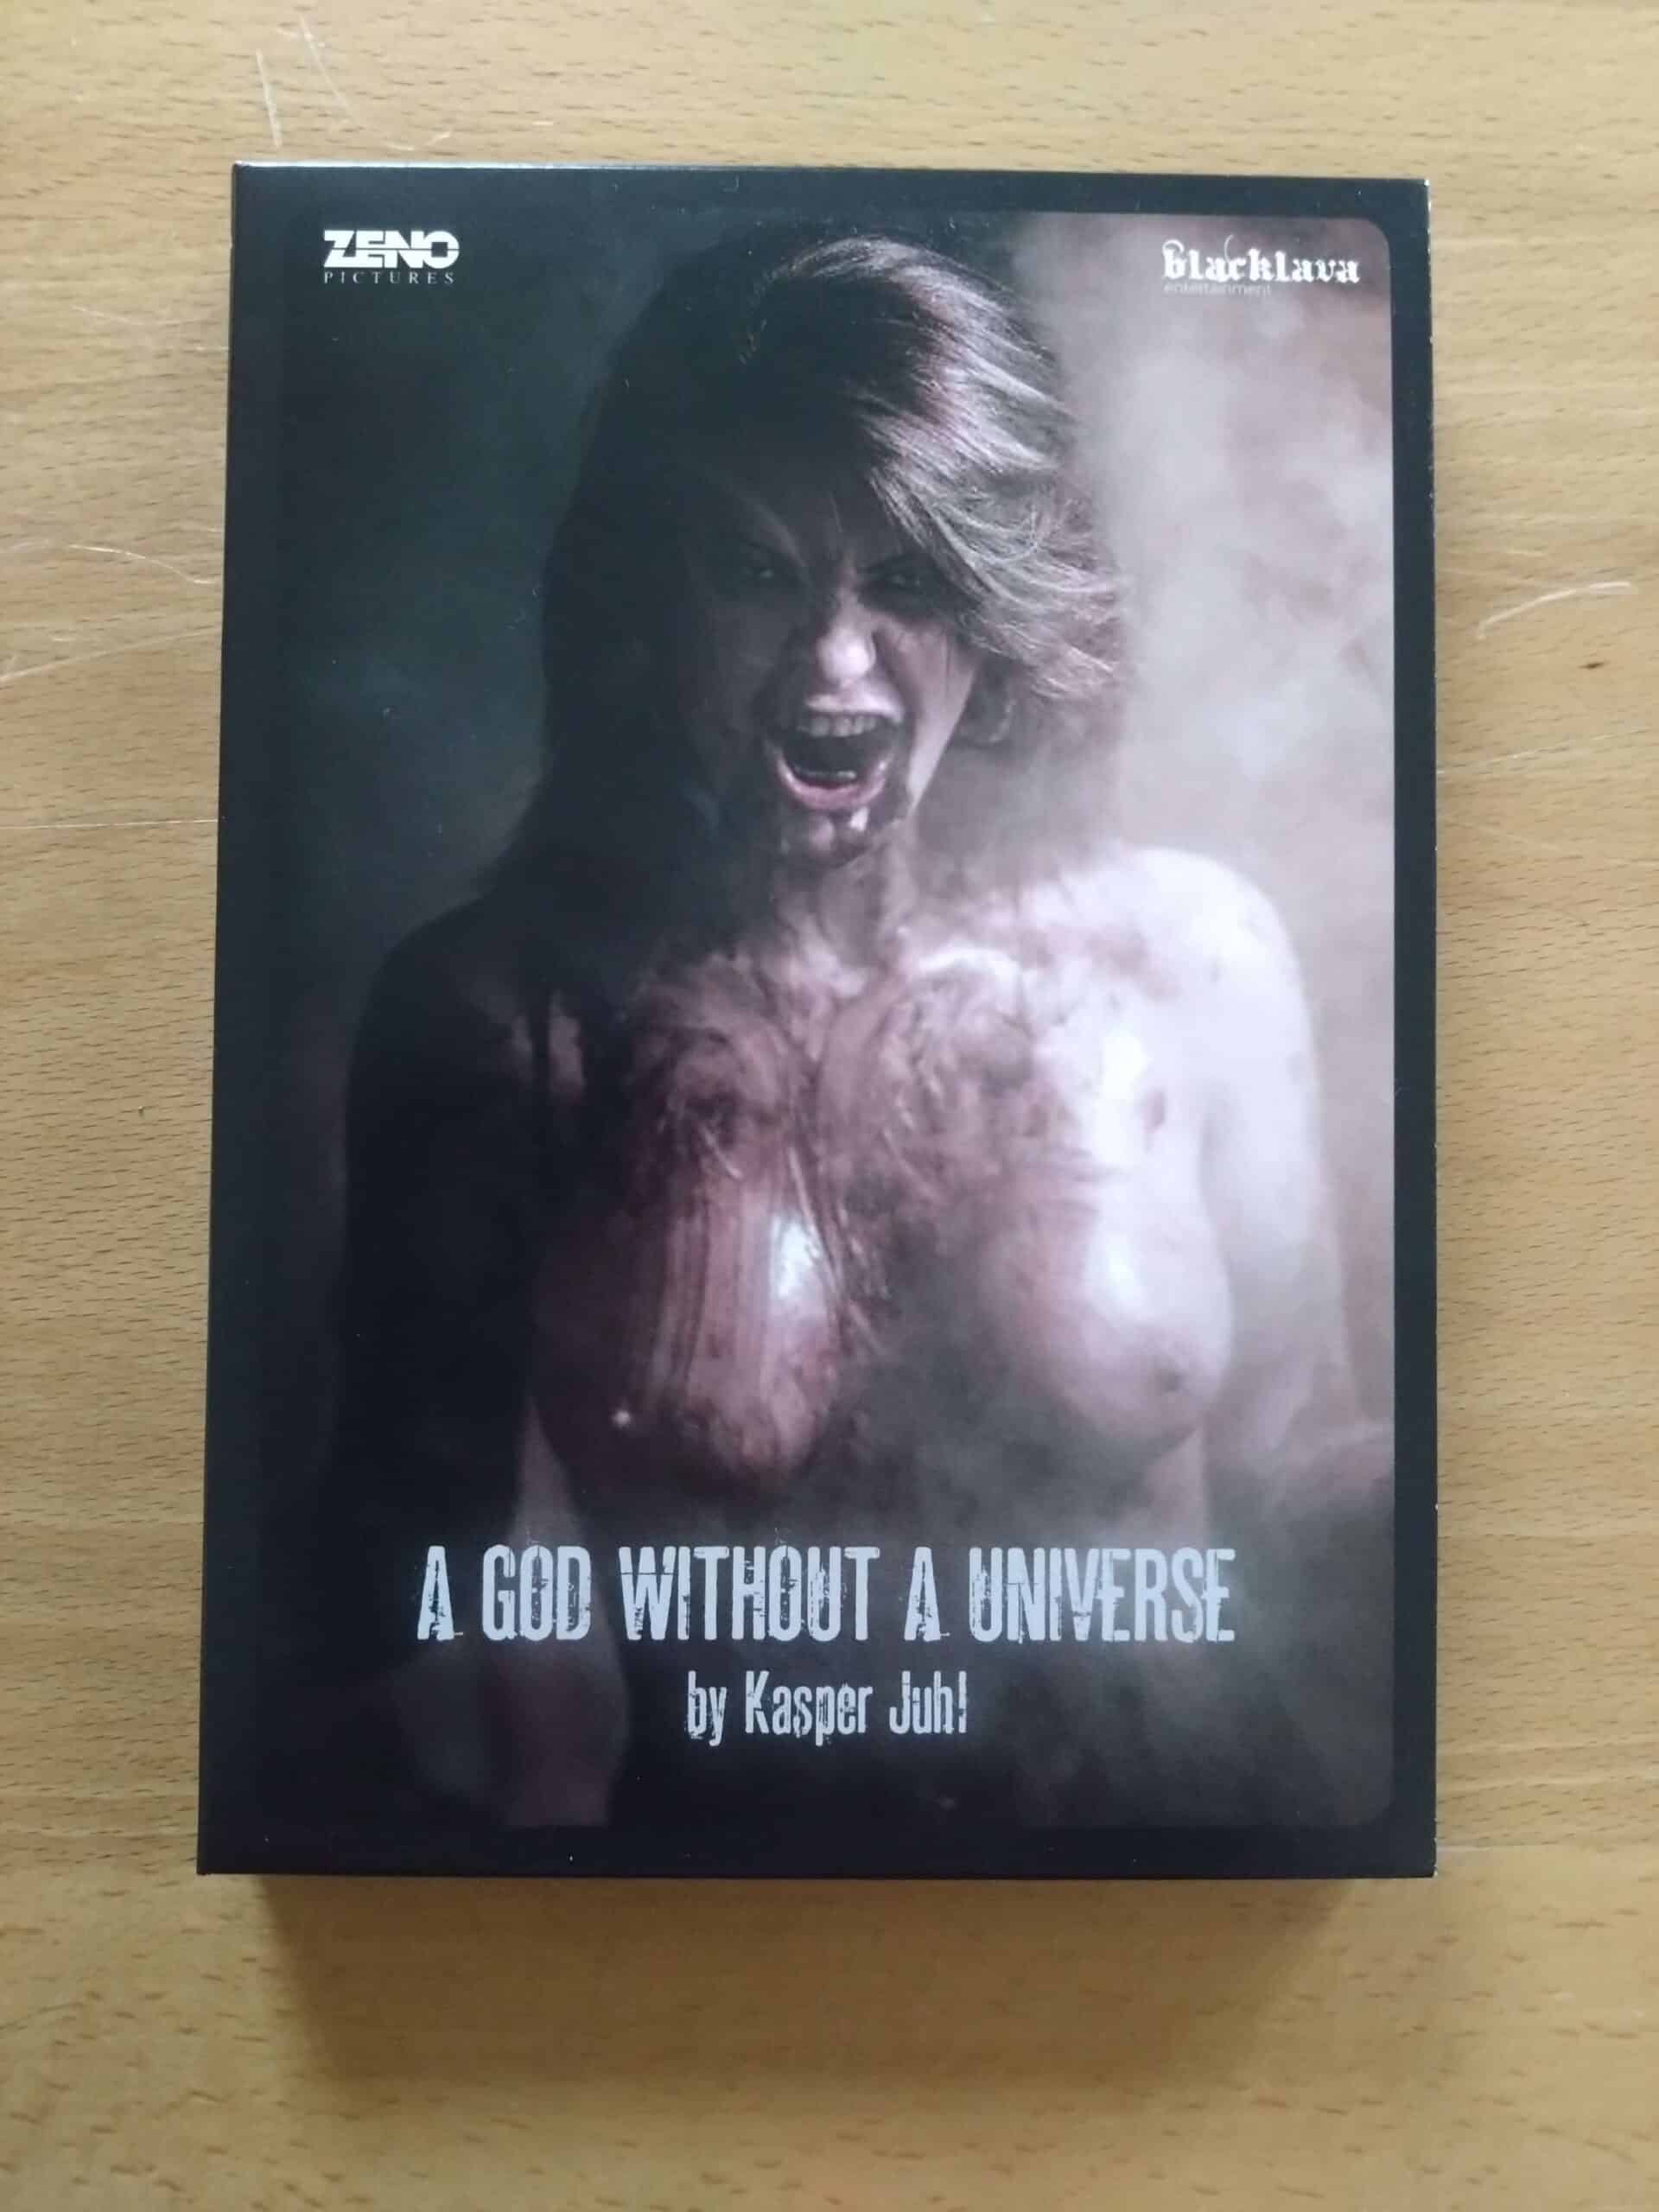 [Review] A God Without A Universe DVD Amaray im Schuber